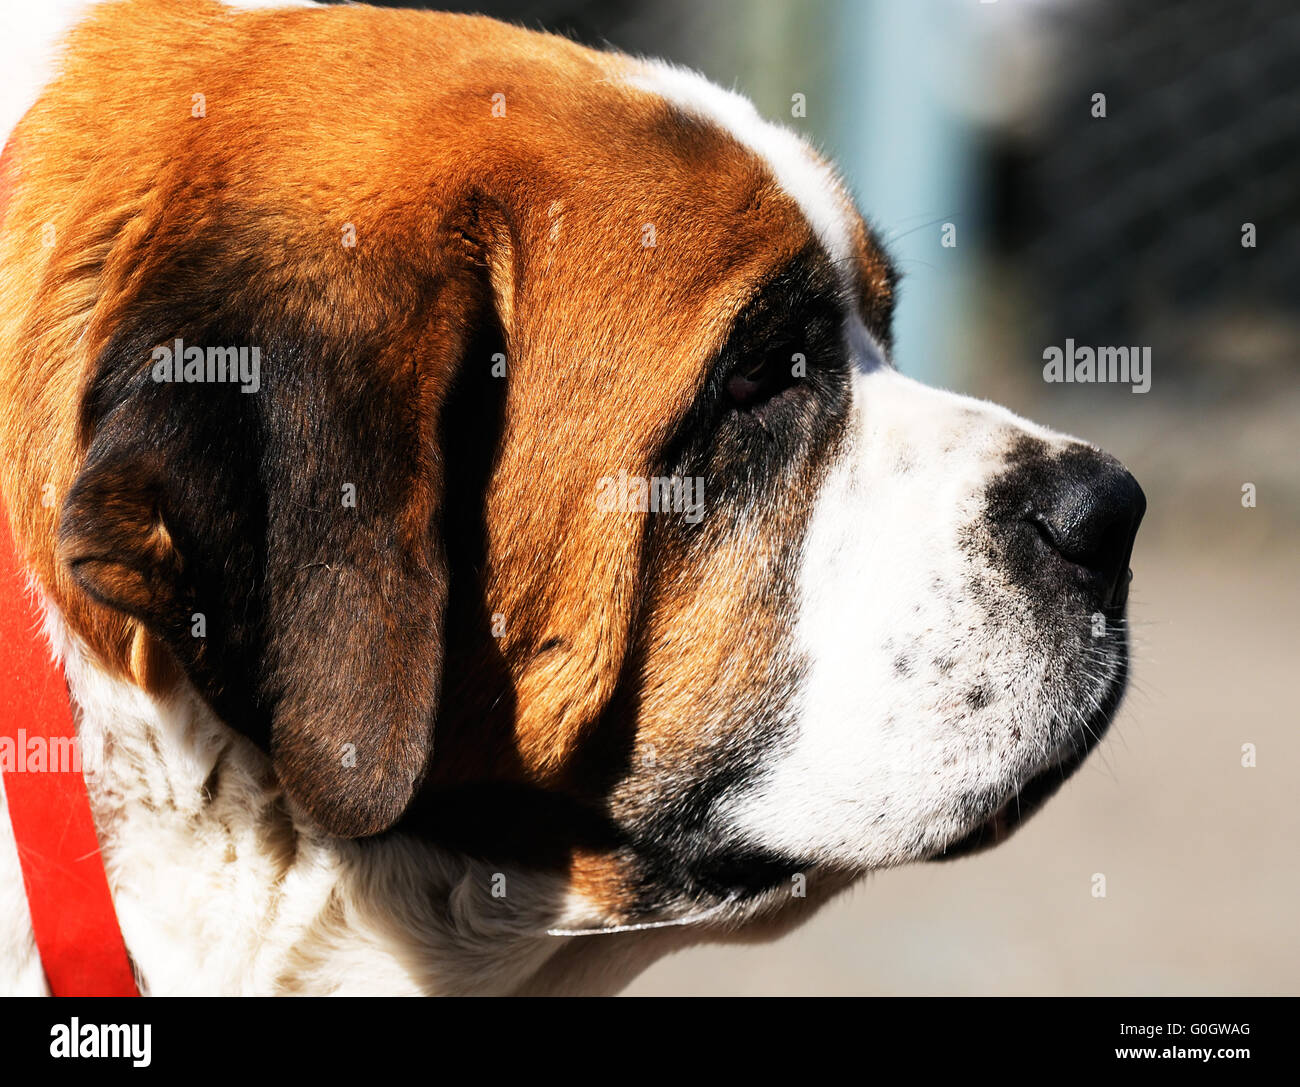 Moscow patrol dog outdoor portrait over blurry background Stock Photo